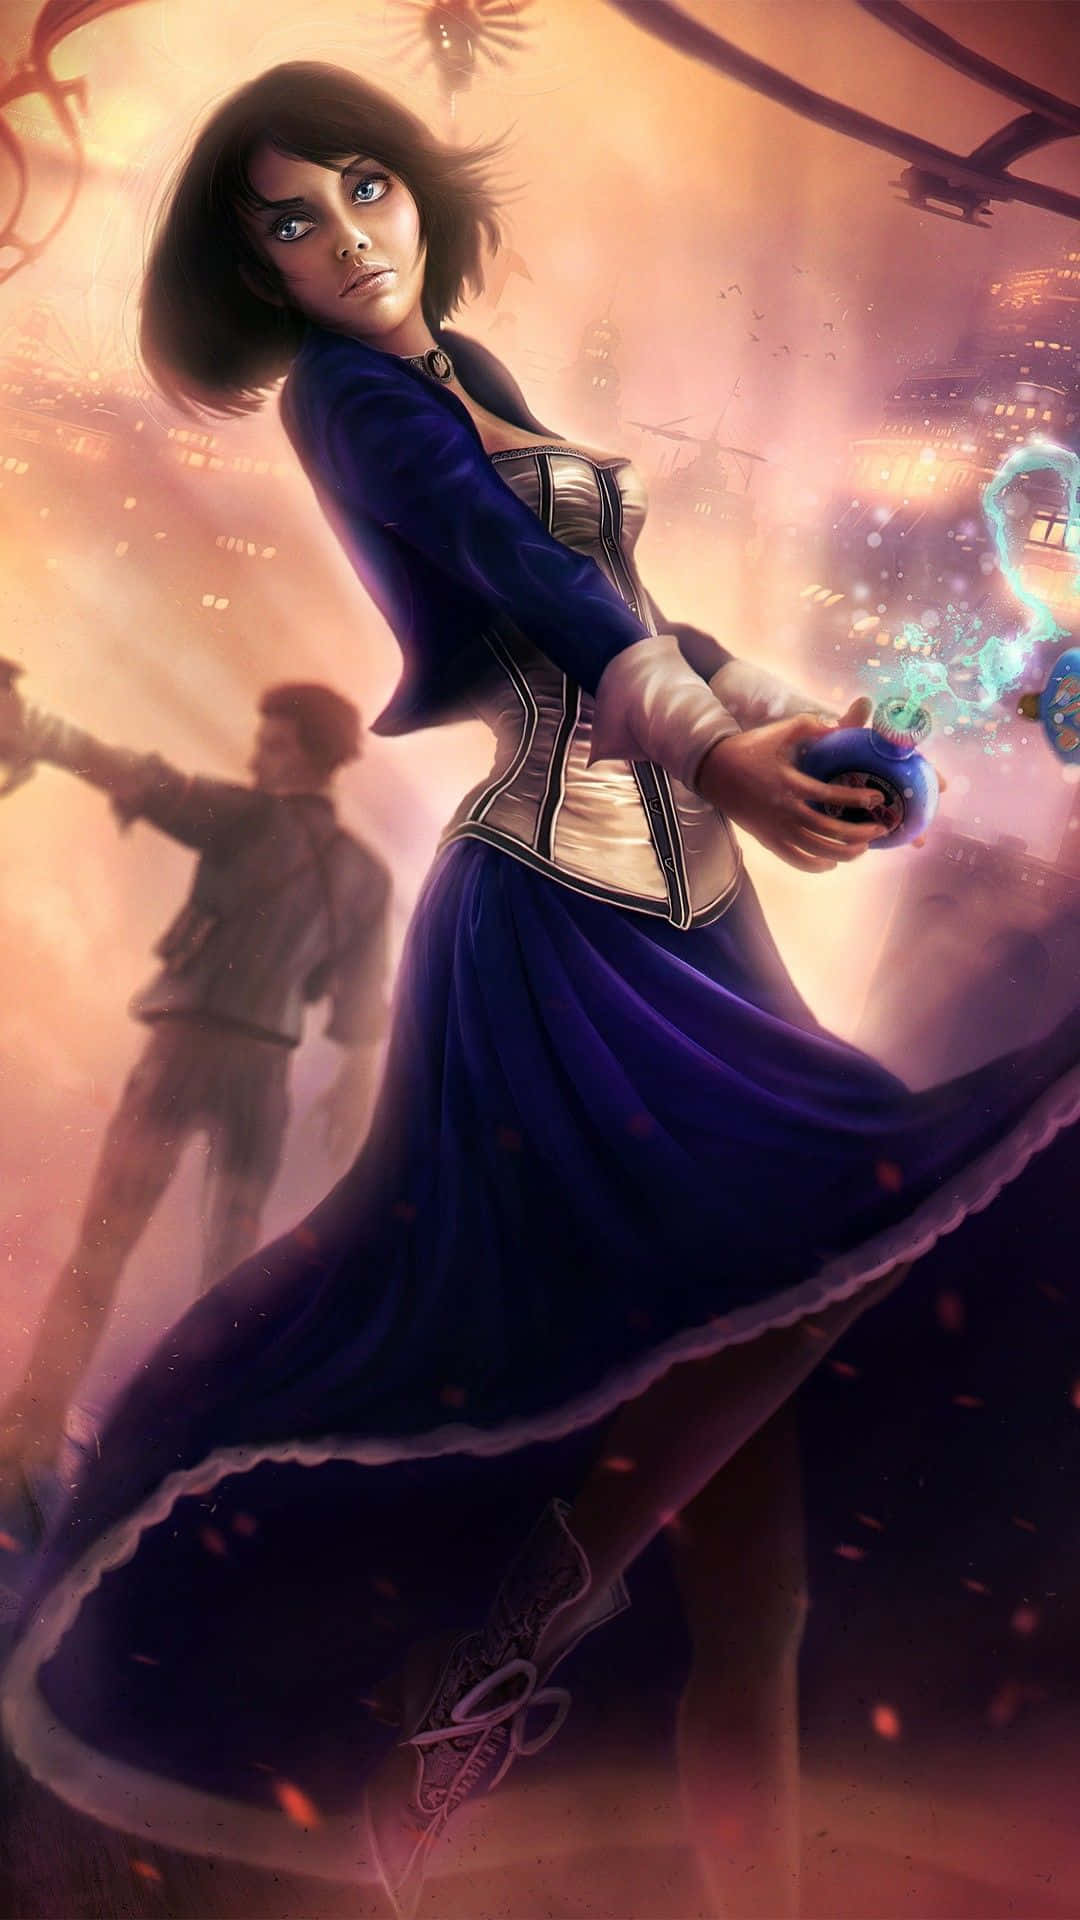 Let your imagination free with Iphone Xs Bioshock Infinite